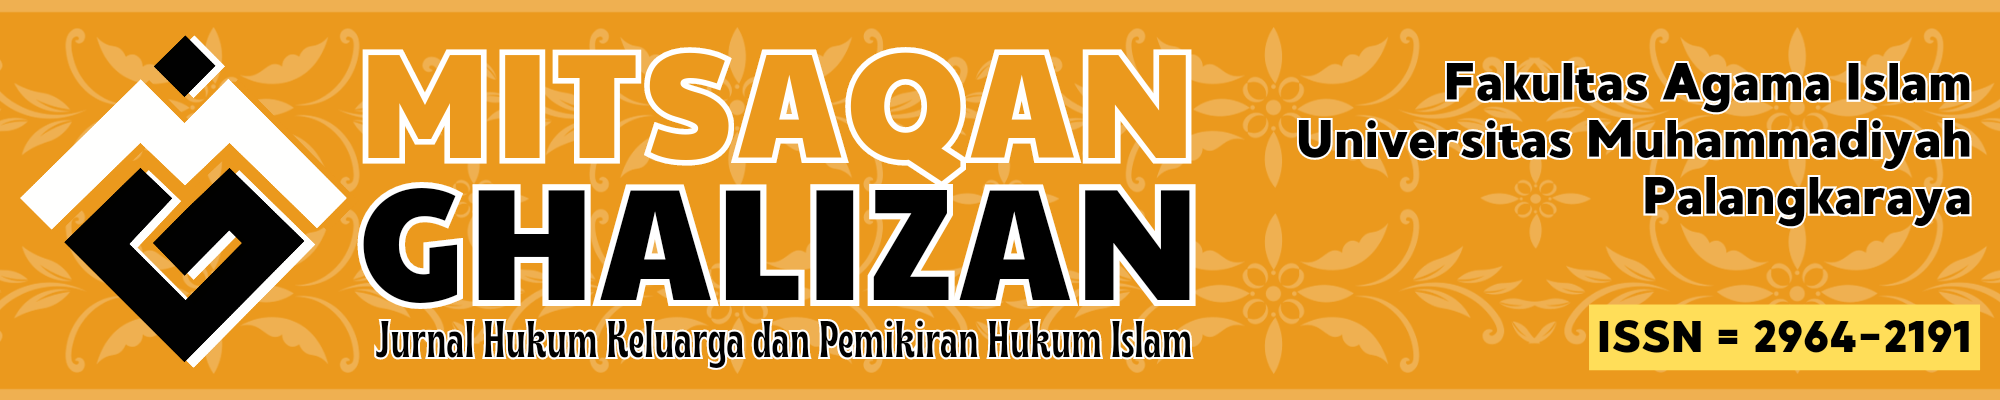 Title: Mitsaqan Ghalizan ISSN: 2964-2191 (online) Subject: Islamic Law Frequency: six-monthly (2 issues per year in June and December) Indexed at: Moraref, Dimensions, Crossref, Google Scholar, GARUDA, and more DOI: 10.33084/mgj Archive preservation: GARUDA Publisher: Institute for Research and Community Services Universitas Muhammadiyah Palangkaraya Editor in Chief: Muhammad Wahdini  Mitsaqan Ghalizan is a Scientific Journal managed by the Department of Islamic Law (Ahwal Syakhshiyah), Faculty of Islamic Studies Universitas Muhammadiyah Palangkaraya, and published twice a year (in June and December) by the Institute for Researches and Community Services Universitas Muhammadiyah Palangkaraya, contains articles of research and critical analysis studies in Al Ahwal Al Syakhsiyah (Islamic Law) and another field related.